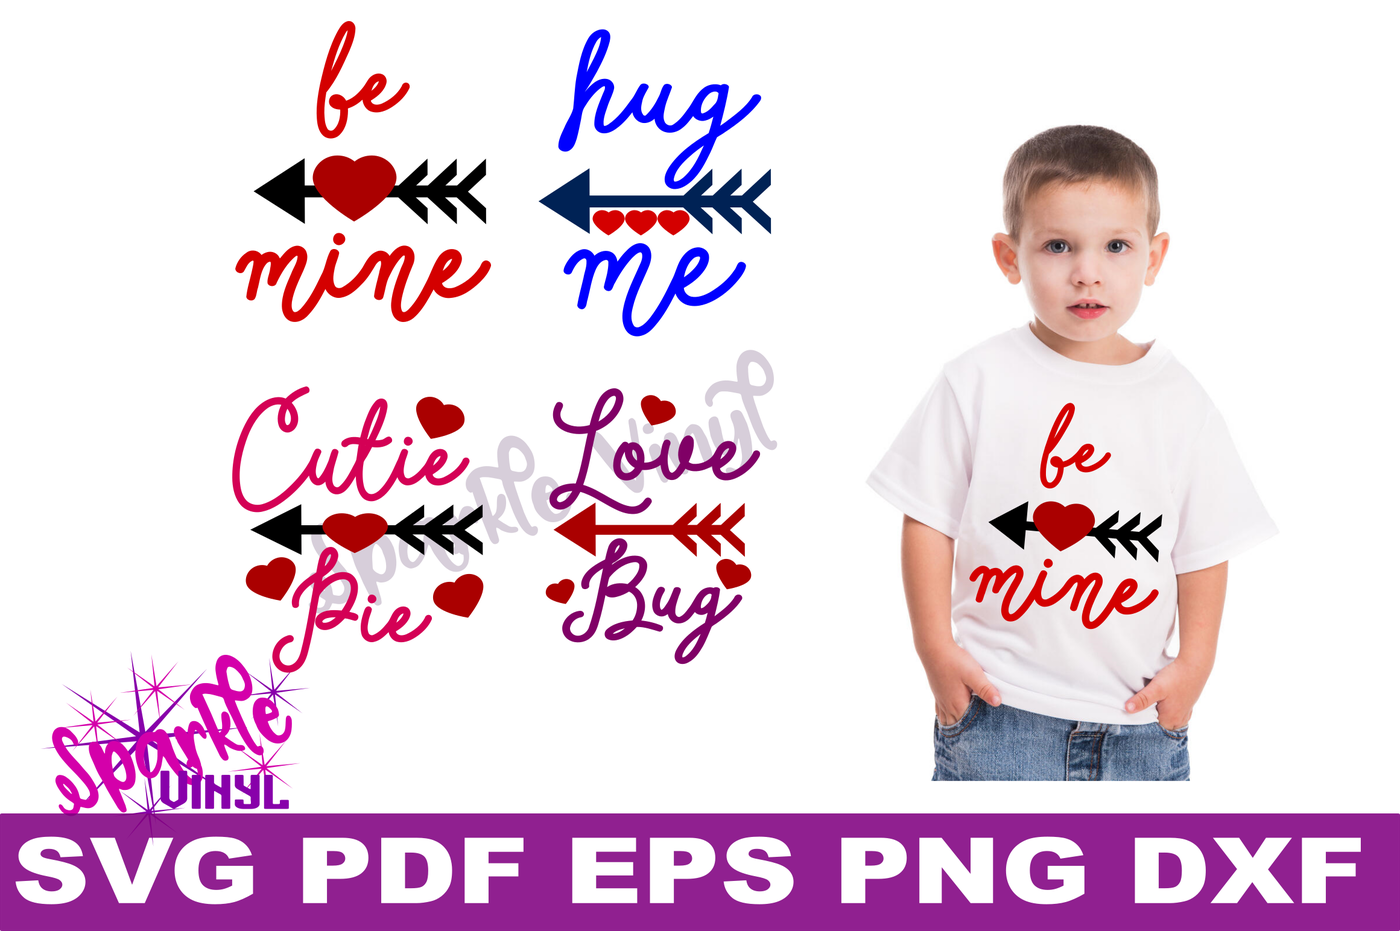 Download Silhouette Svg Files For Cricut Png Dxf Baby Girl Svg Toddler Svg All My Pants Are Sassy Svg Shirt Svg Cute Svg For Girls Clip Art Art Collectibles